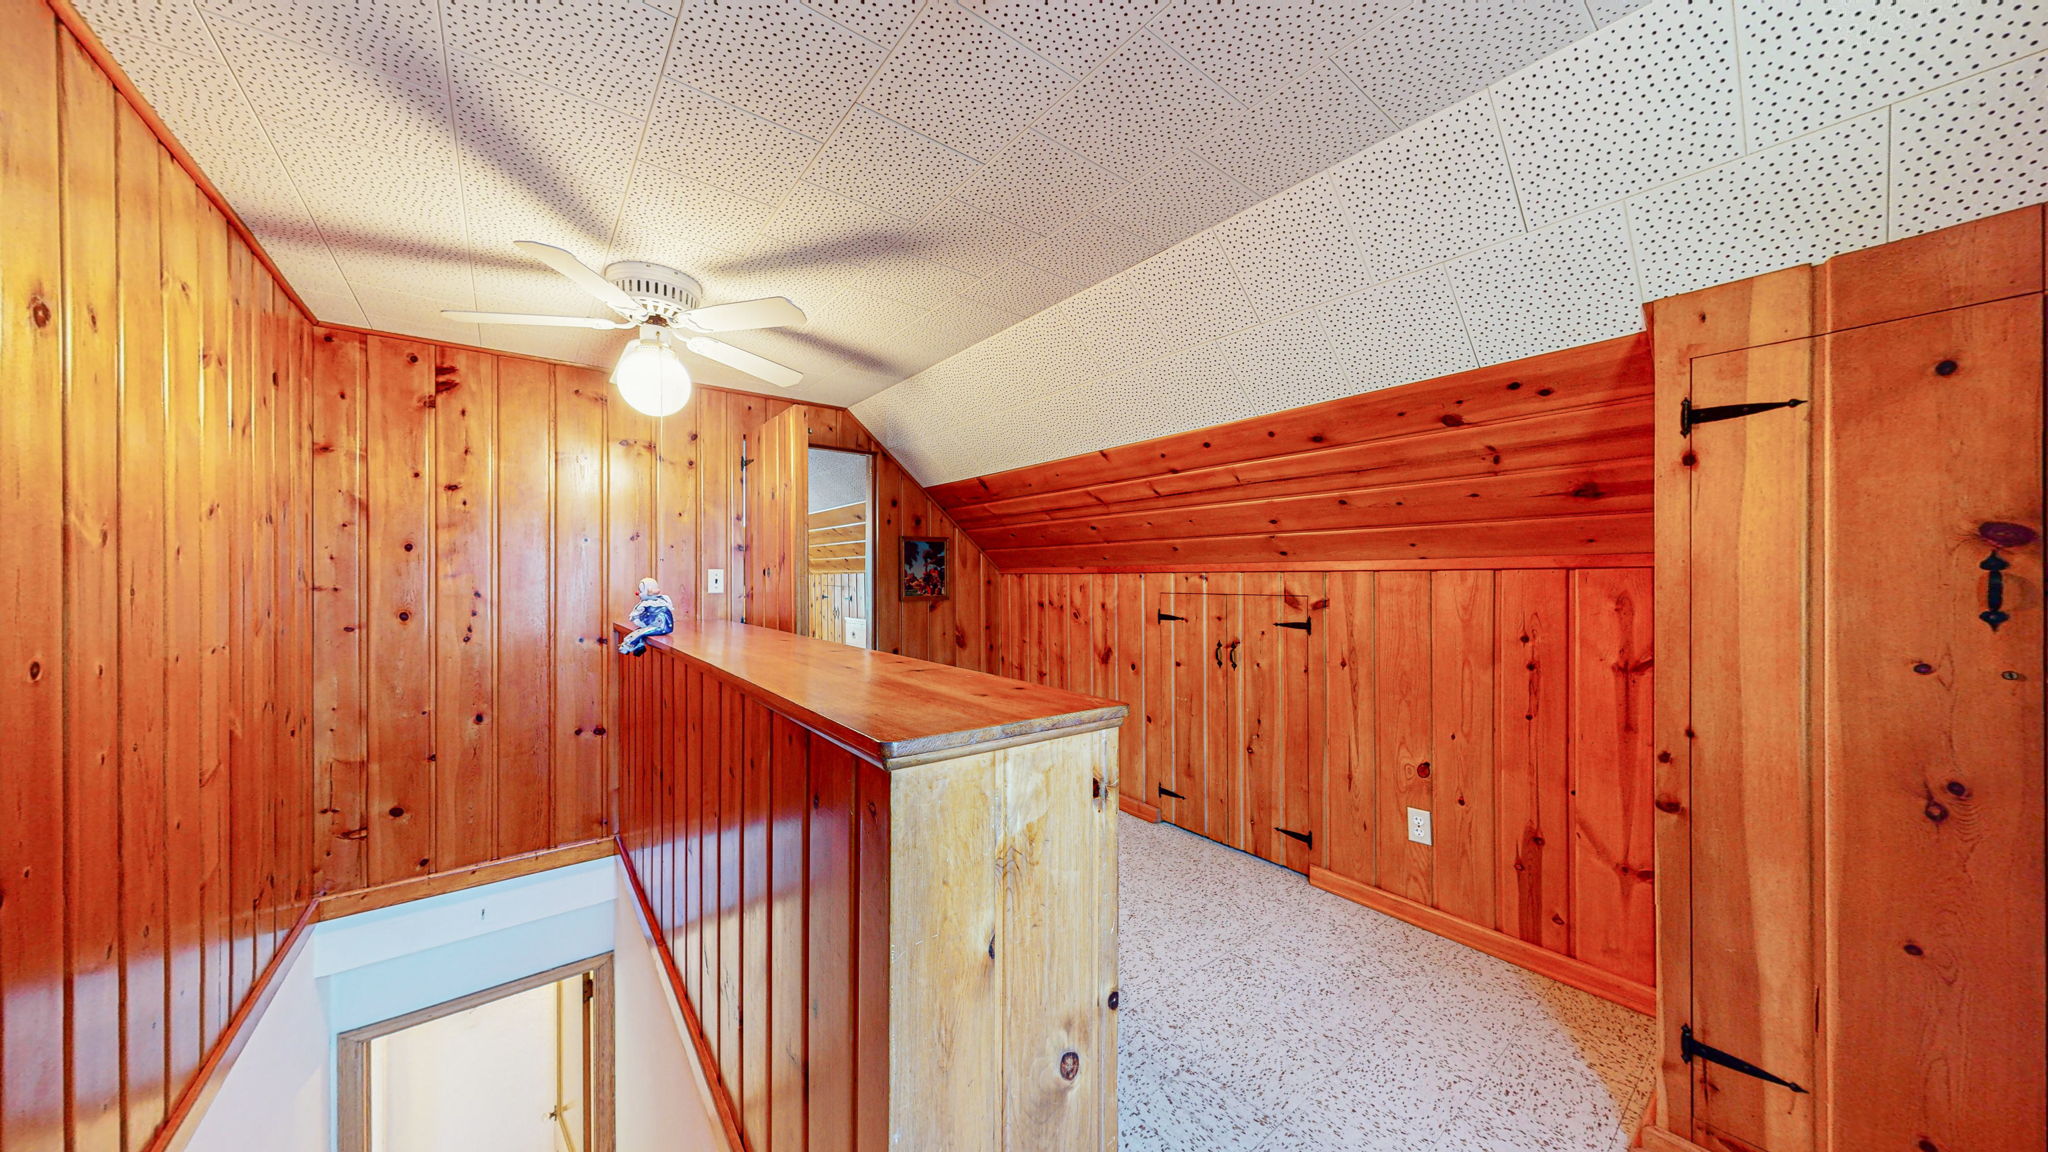 Classic knotty pine upper level awaits your decorating touch